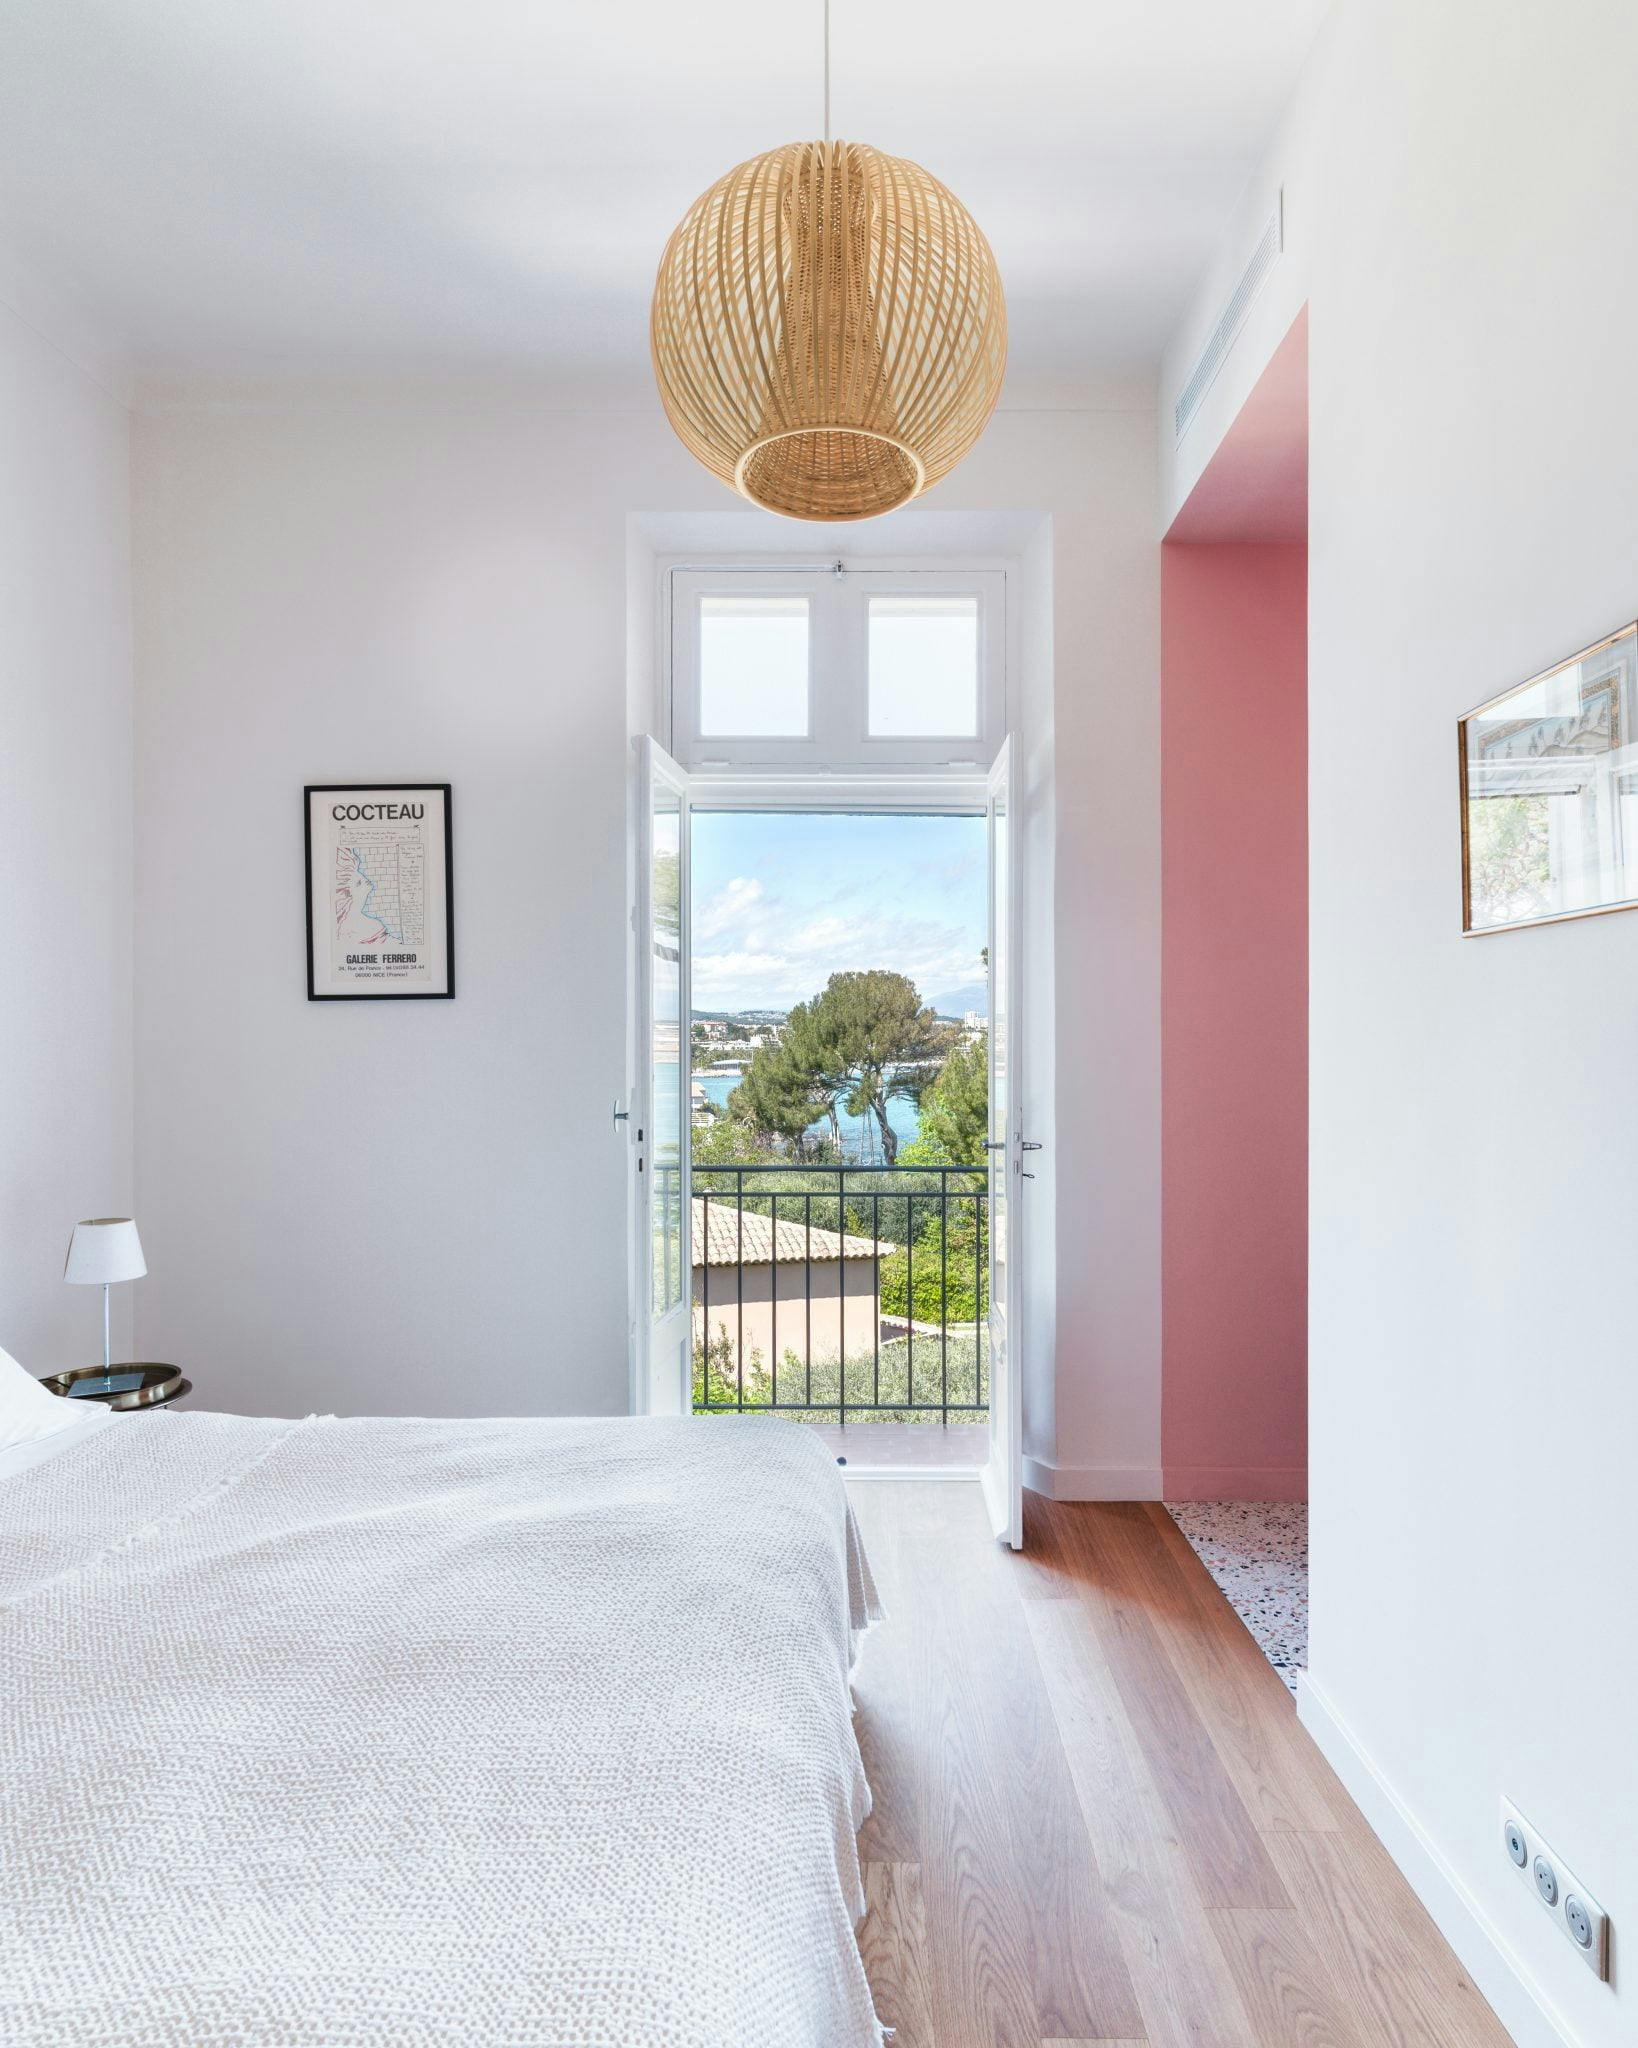 Room with parquet floor, views of nature and the sea from the balcony